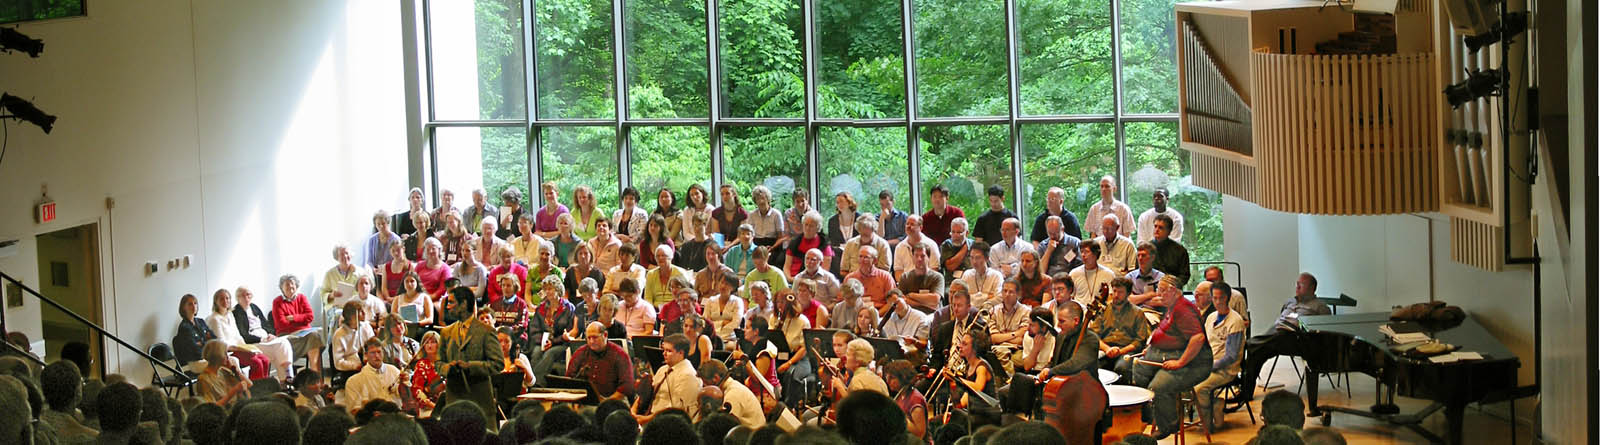 John Alston conducts the Mozart Requium, Swarthmore's Lang Music Center 2005